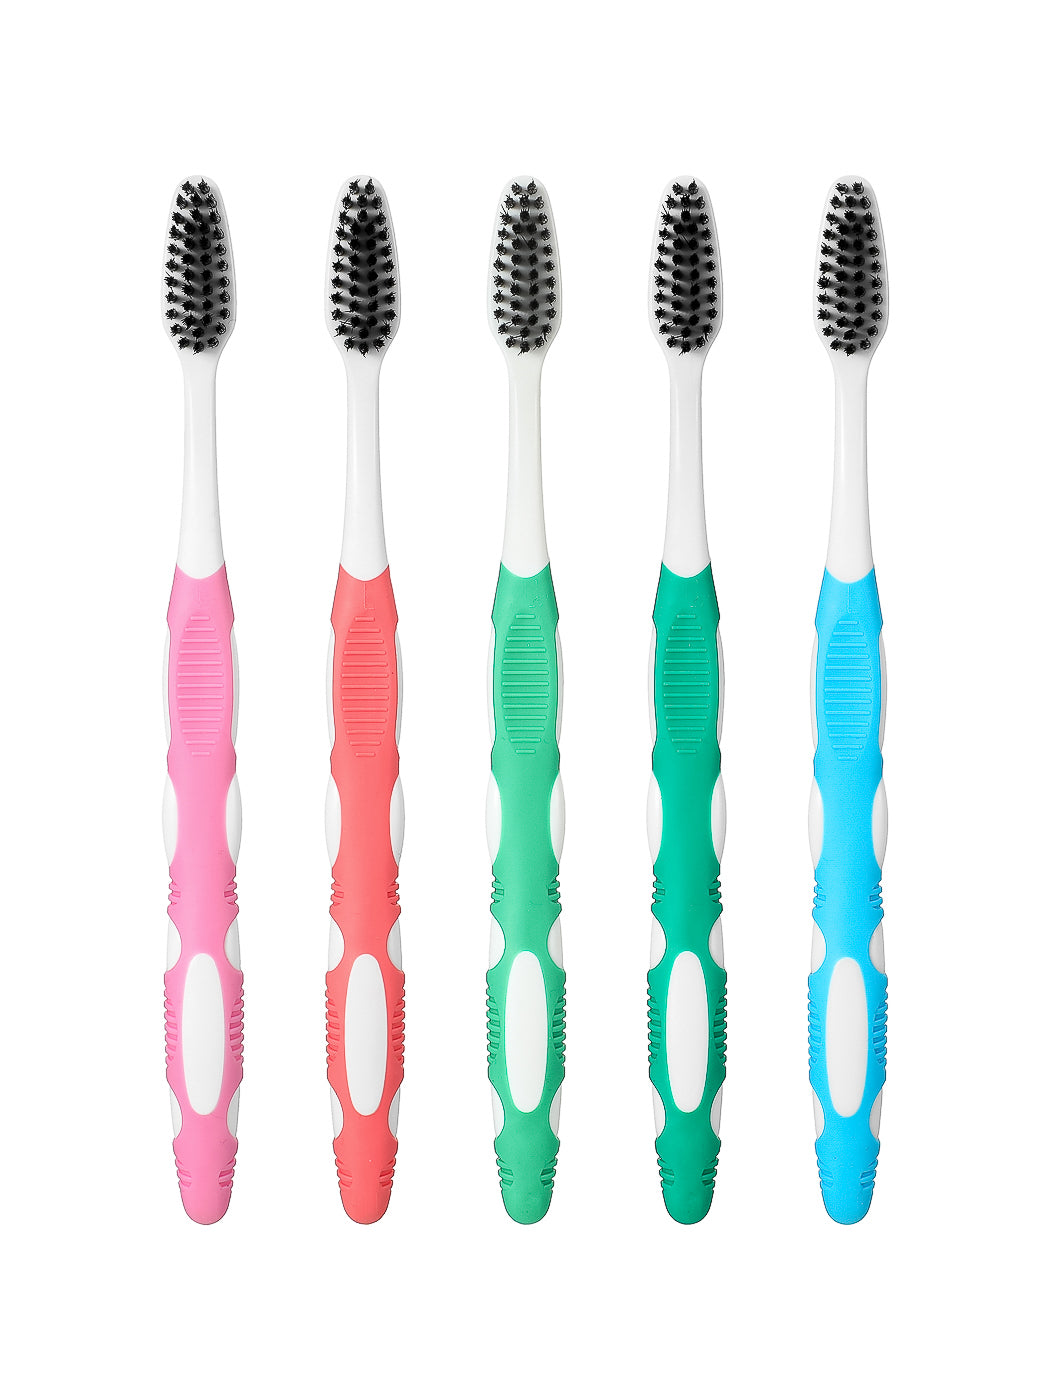 MINISO GUM CARE BINCHOTAN TOOTHBRUSHES ( 5 PCS ) 2010215610107 SKIN CARE & CLEANSING PRODUCTS